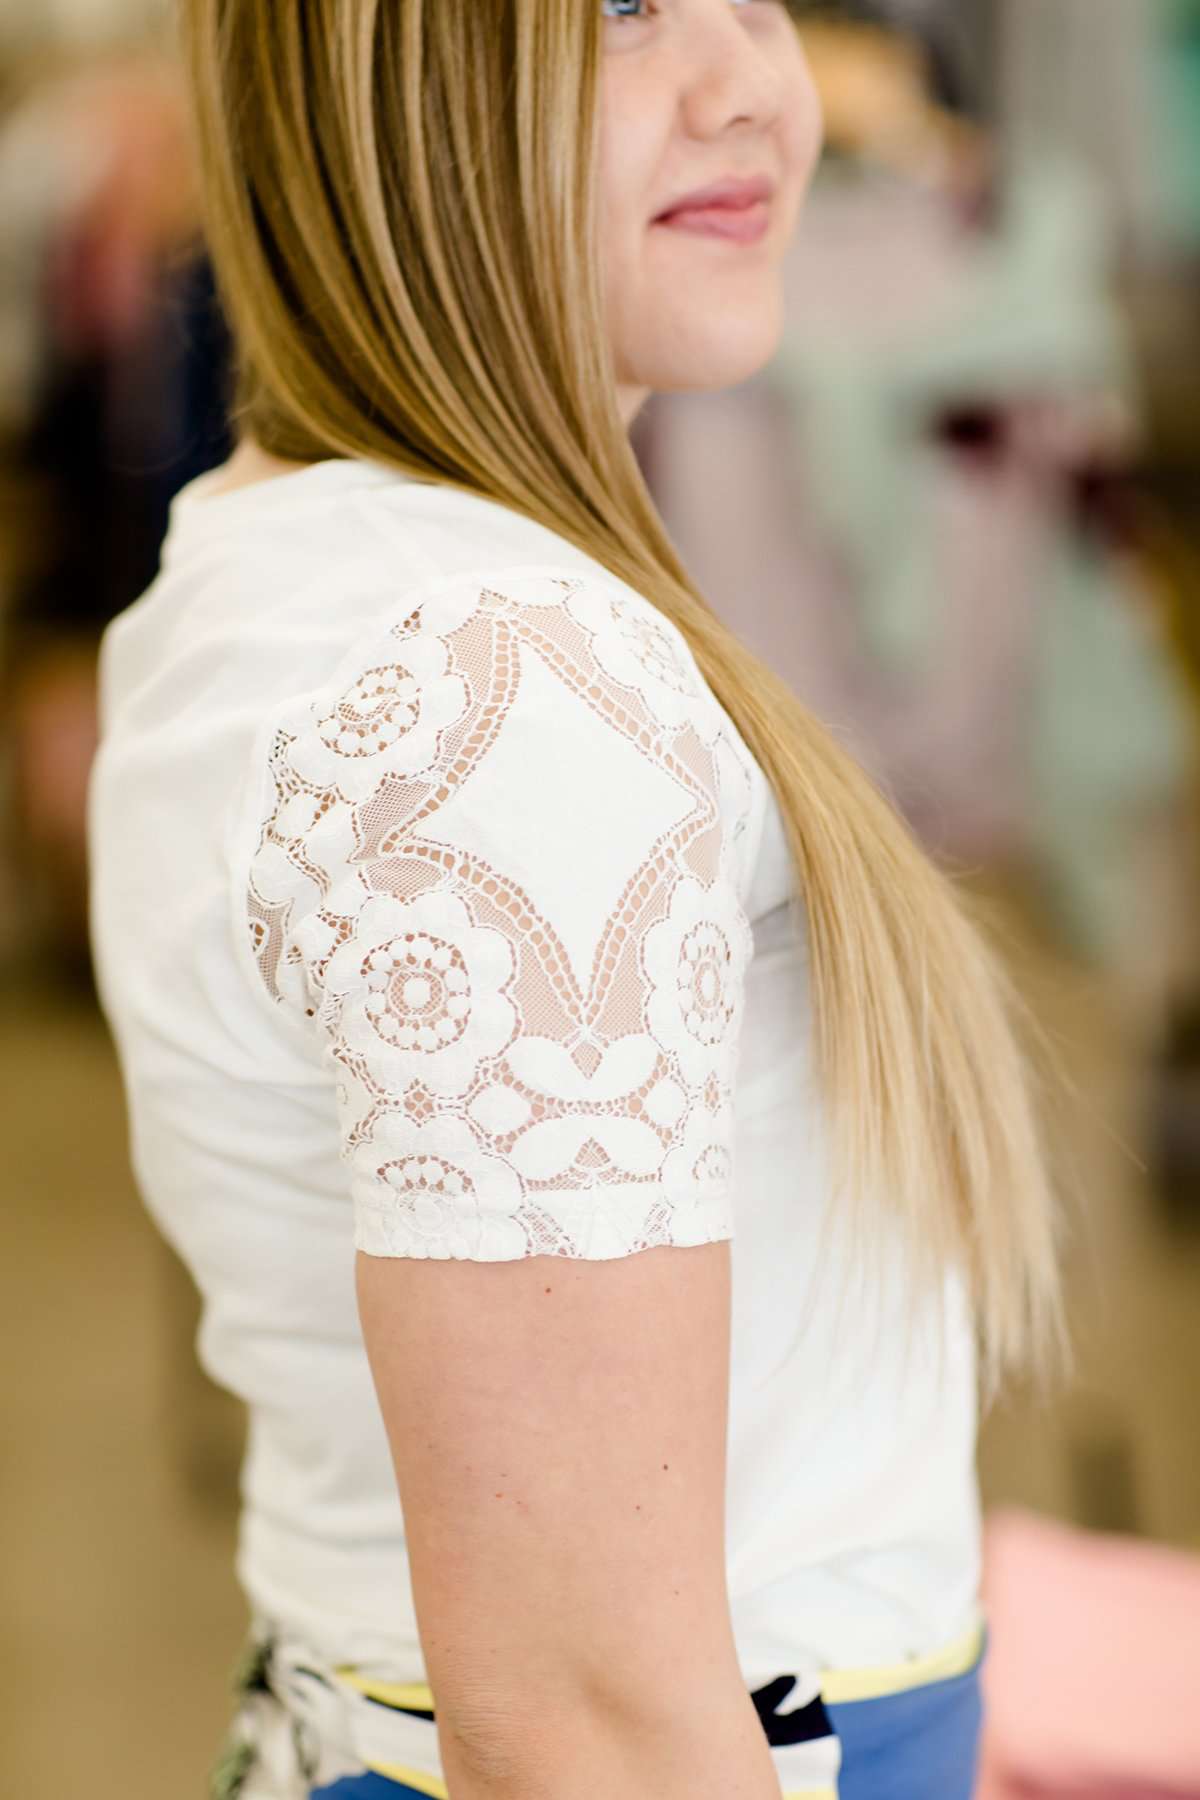 woman wearing a modest white v-neck tee shirt with feminine lace detail on sleeves